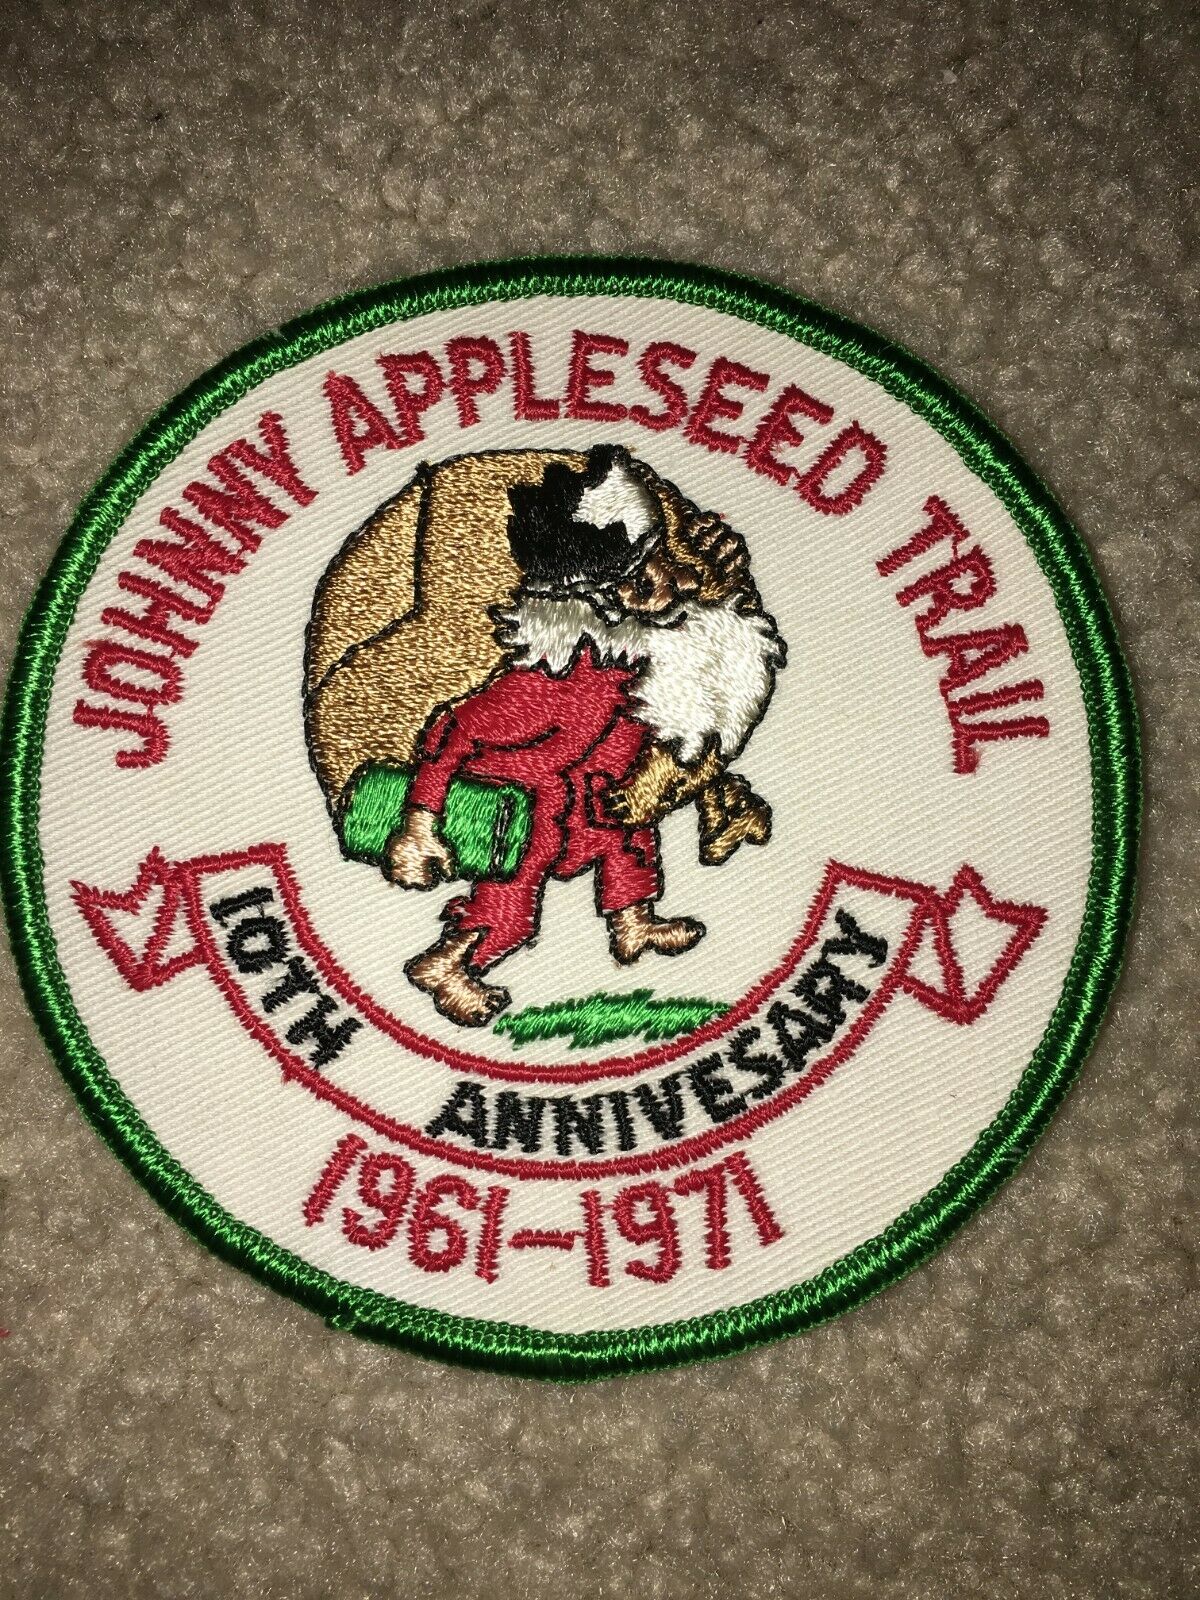 Boy Scout Johnny Appleseed 10th Anniversary 1961 1971 Ohio Indiana Trail Patch